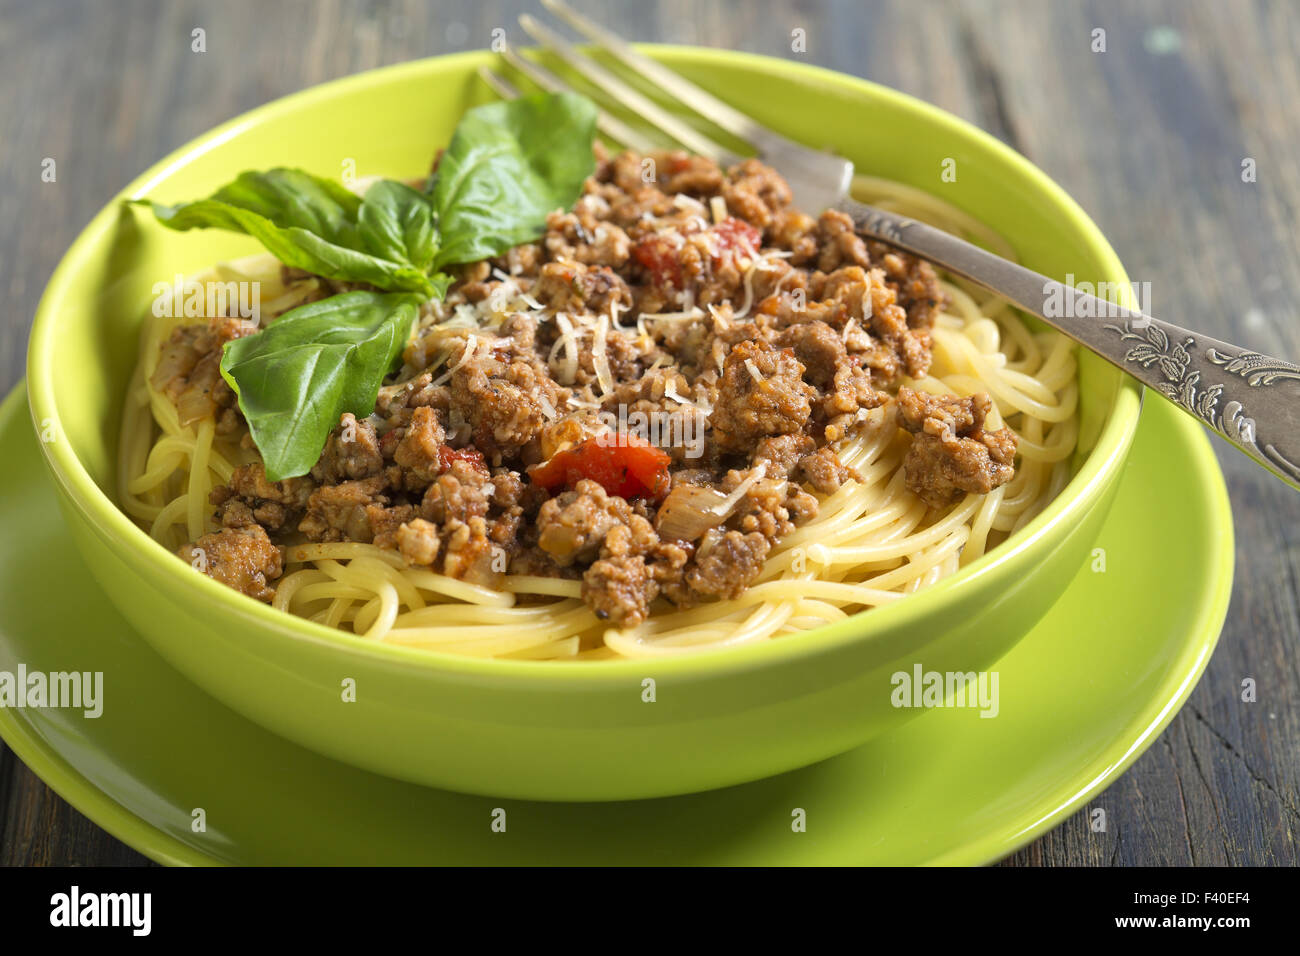 Spaghetti with bolognese sauce. Stock Photo